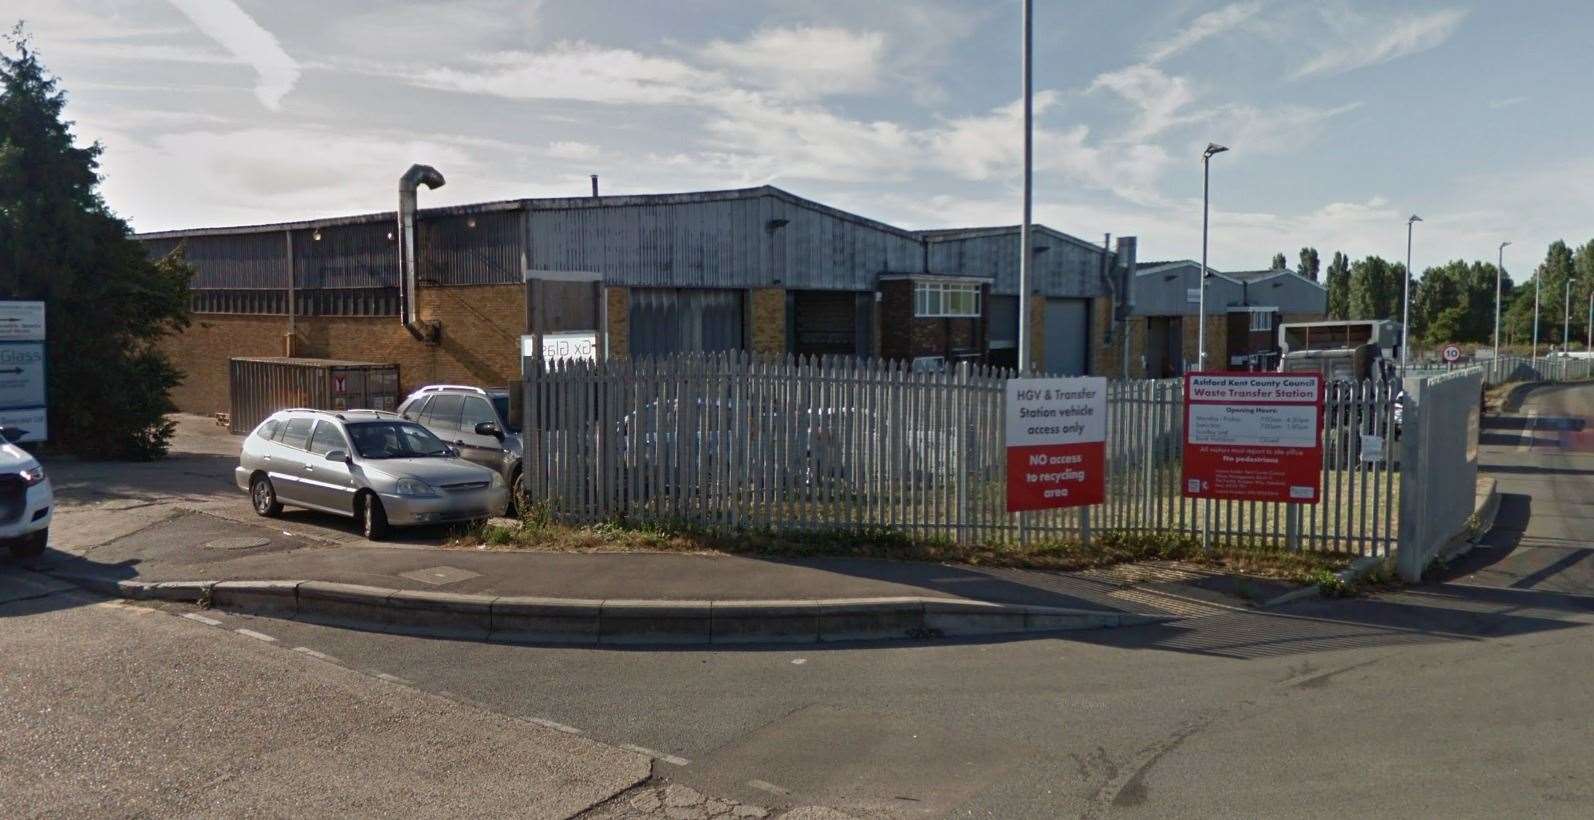 The Household Waste Recycling Centre on Brunswick Road, Ashford caught fire this afternoon. Picture: Google